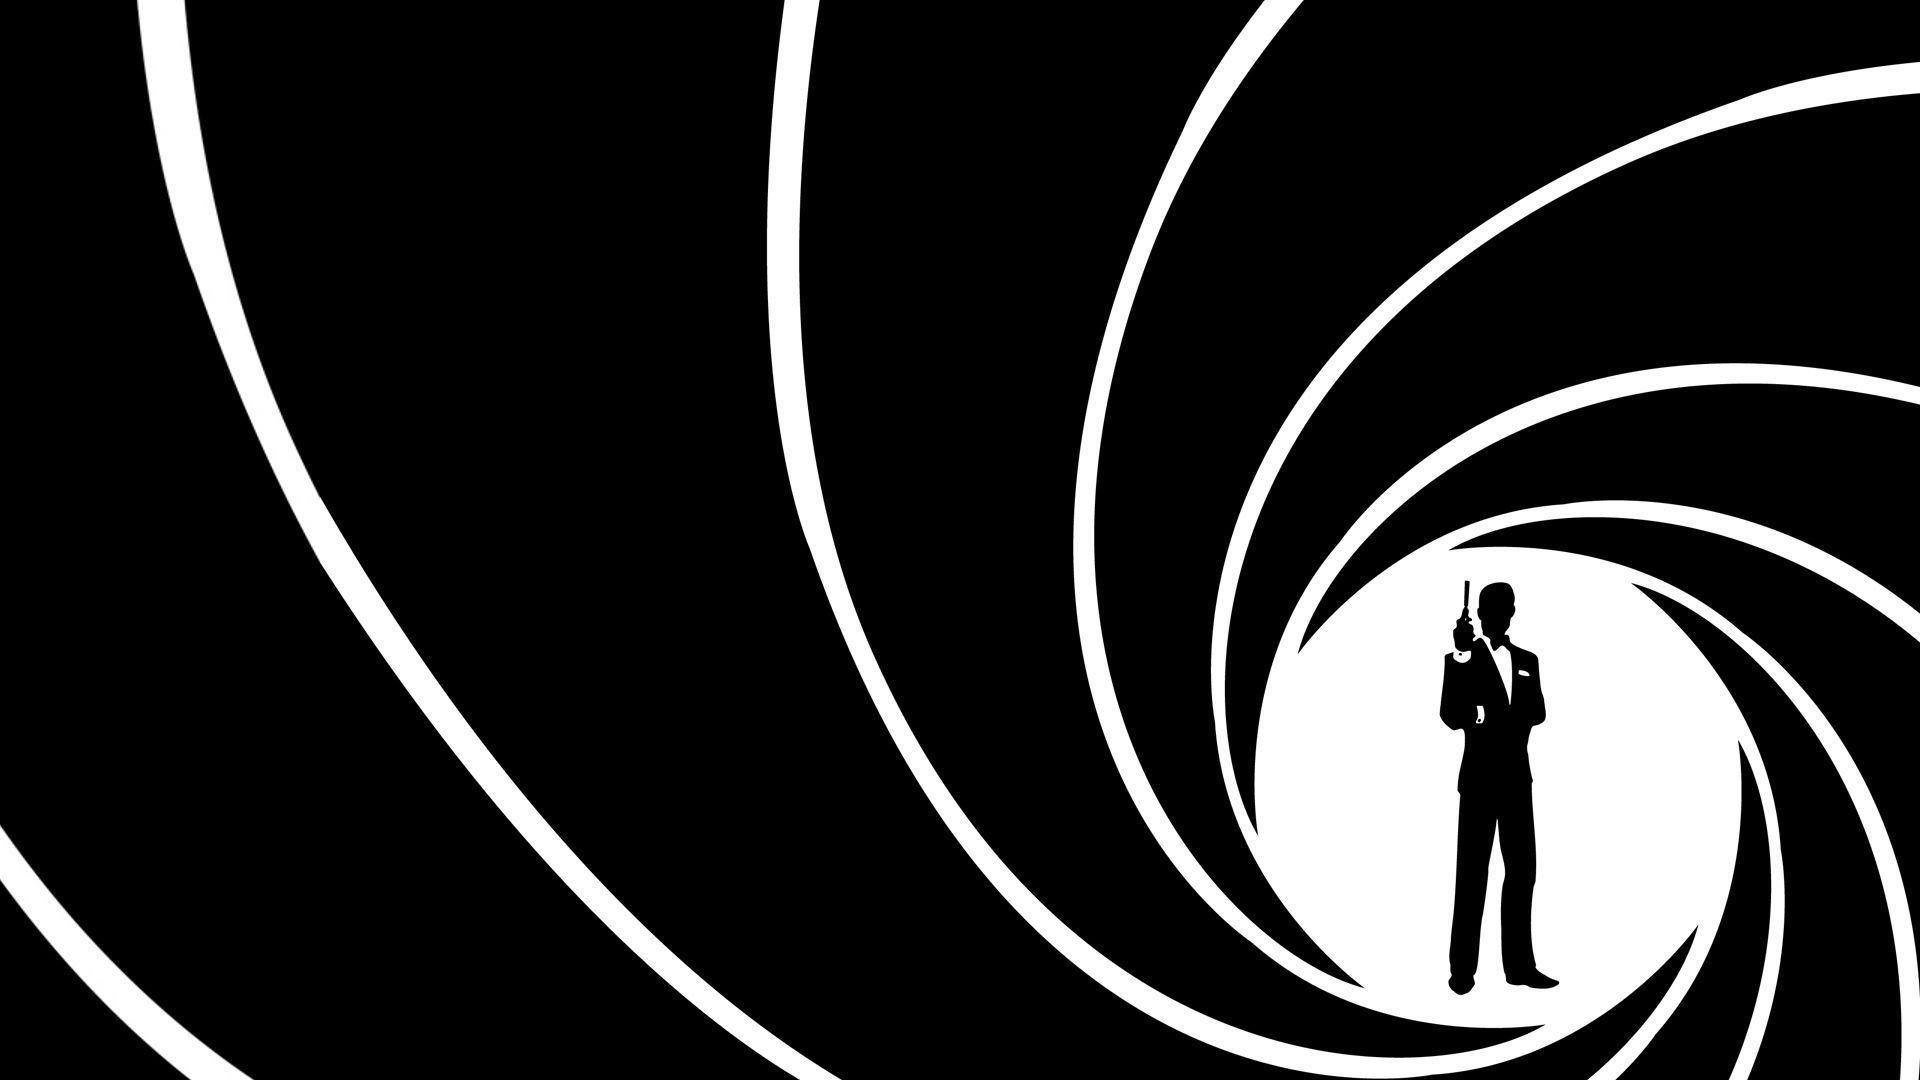 A James Bond Trivia Quiz To Determine Whether You Have A License To Kill